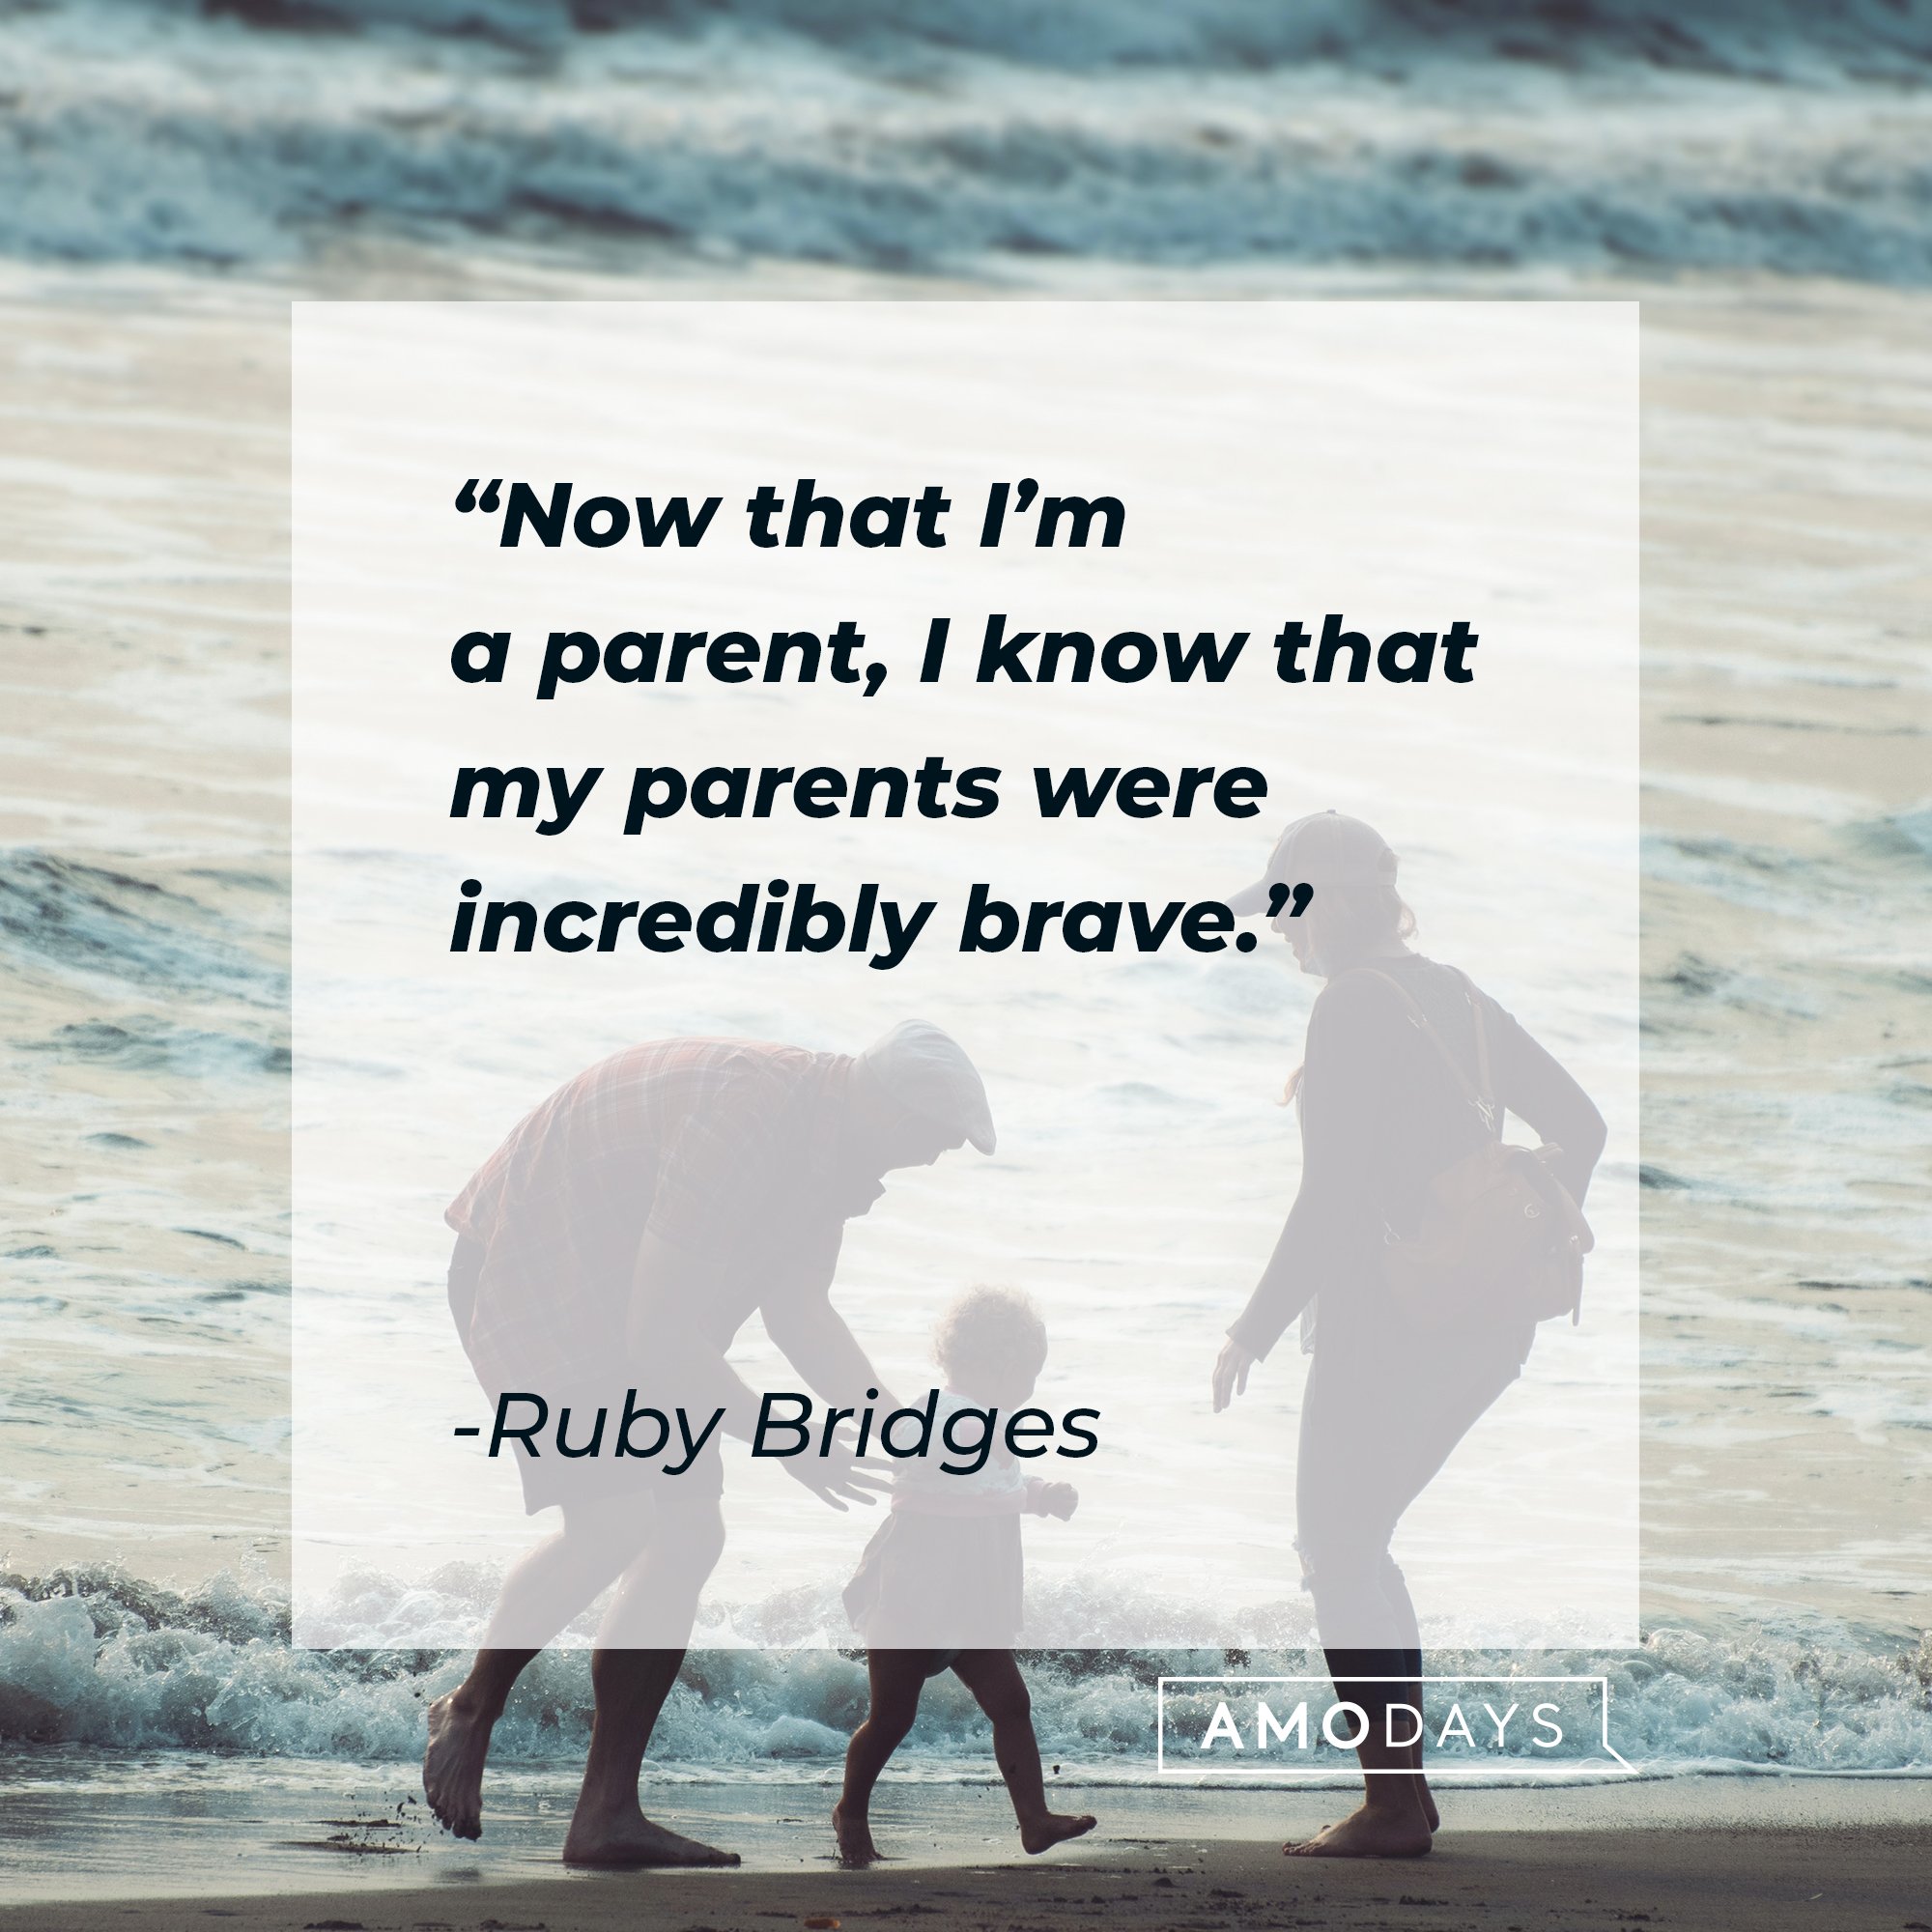 Ruby Bridges’ quote: “Now that I’m a parent, I know that my parents were incredibly brave.” | Image: AmoDays 